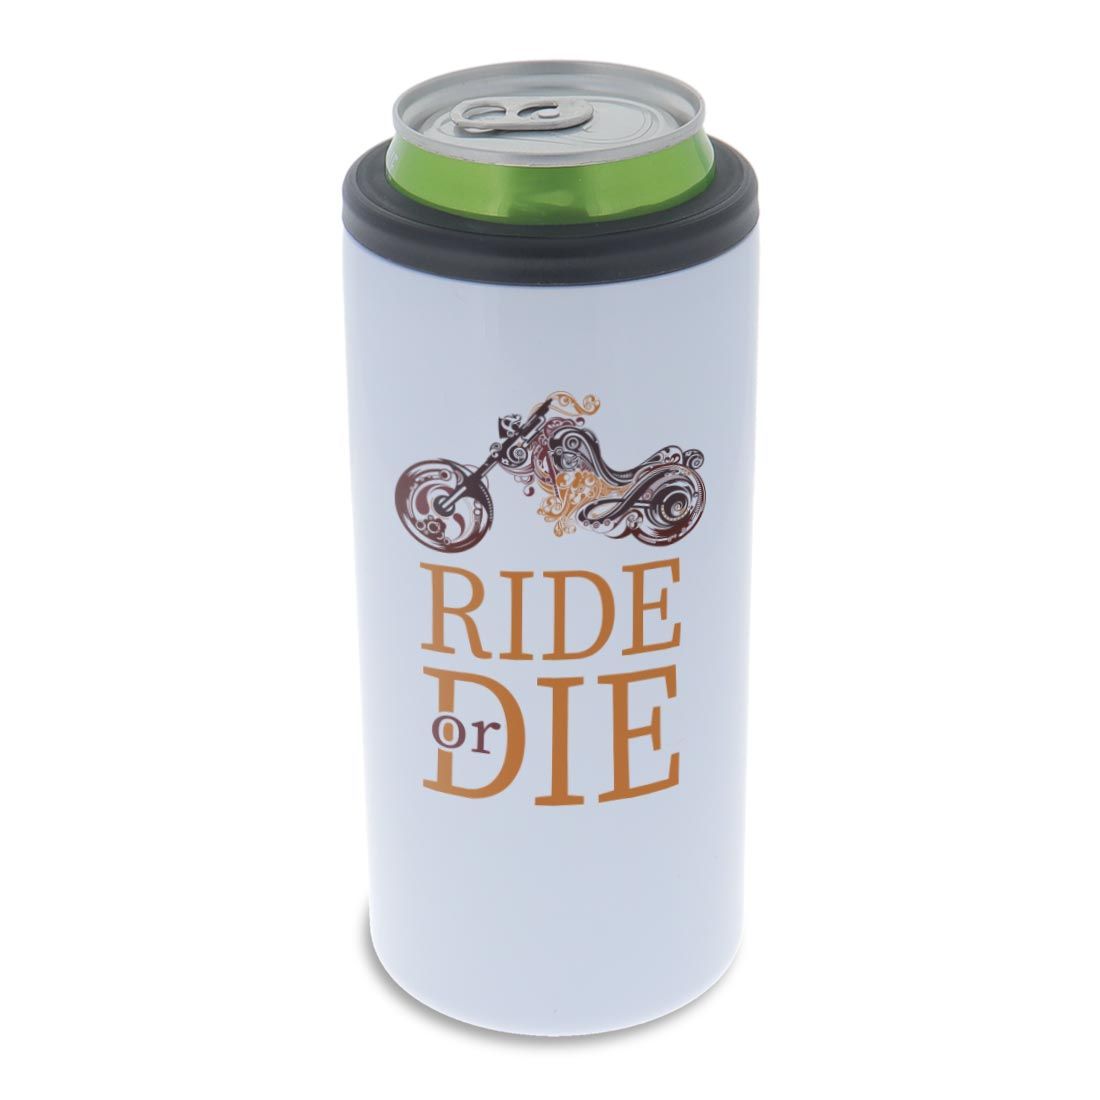 Koozie Stainless Steel Double Wall Insulated Can Cooler 12oz